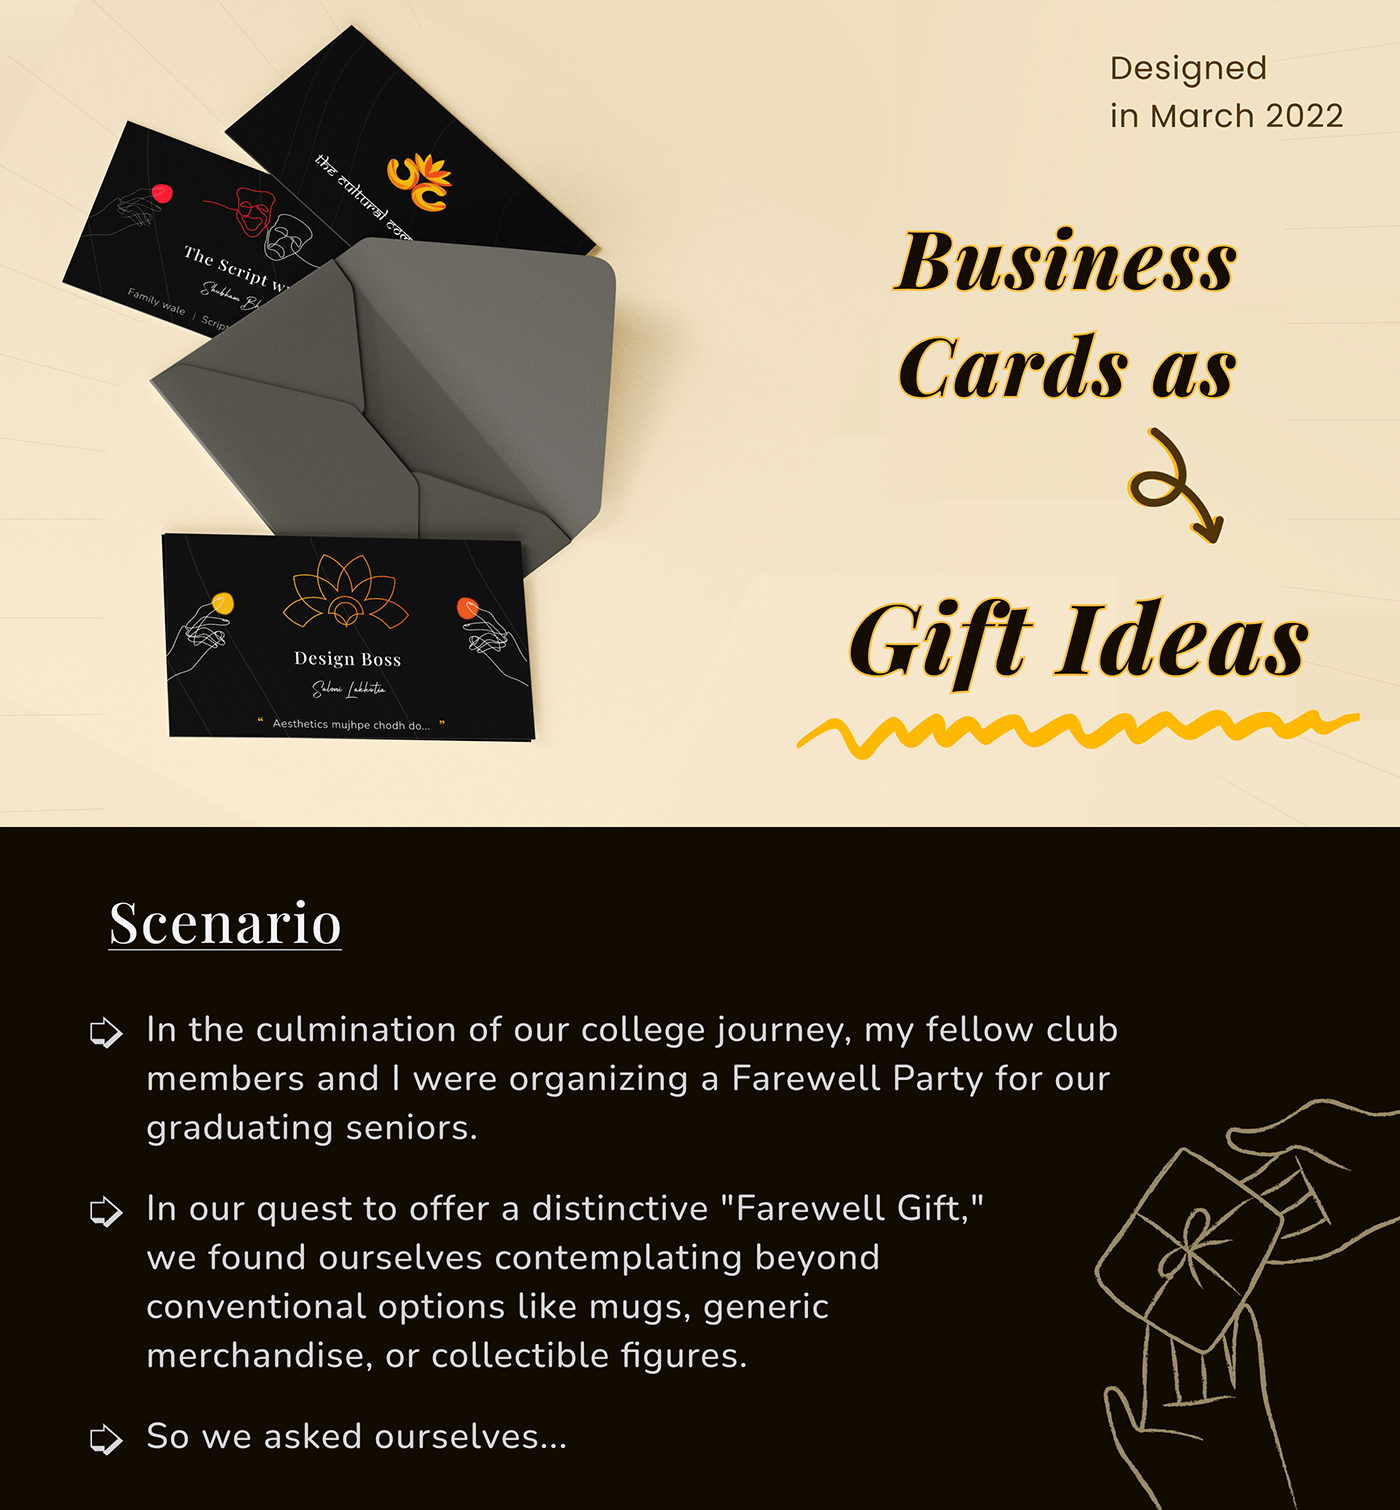 Introductory regarding the project - which showcases ho we used Business cards as gift ideas college